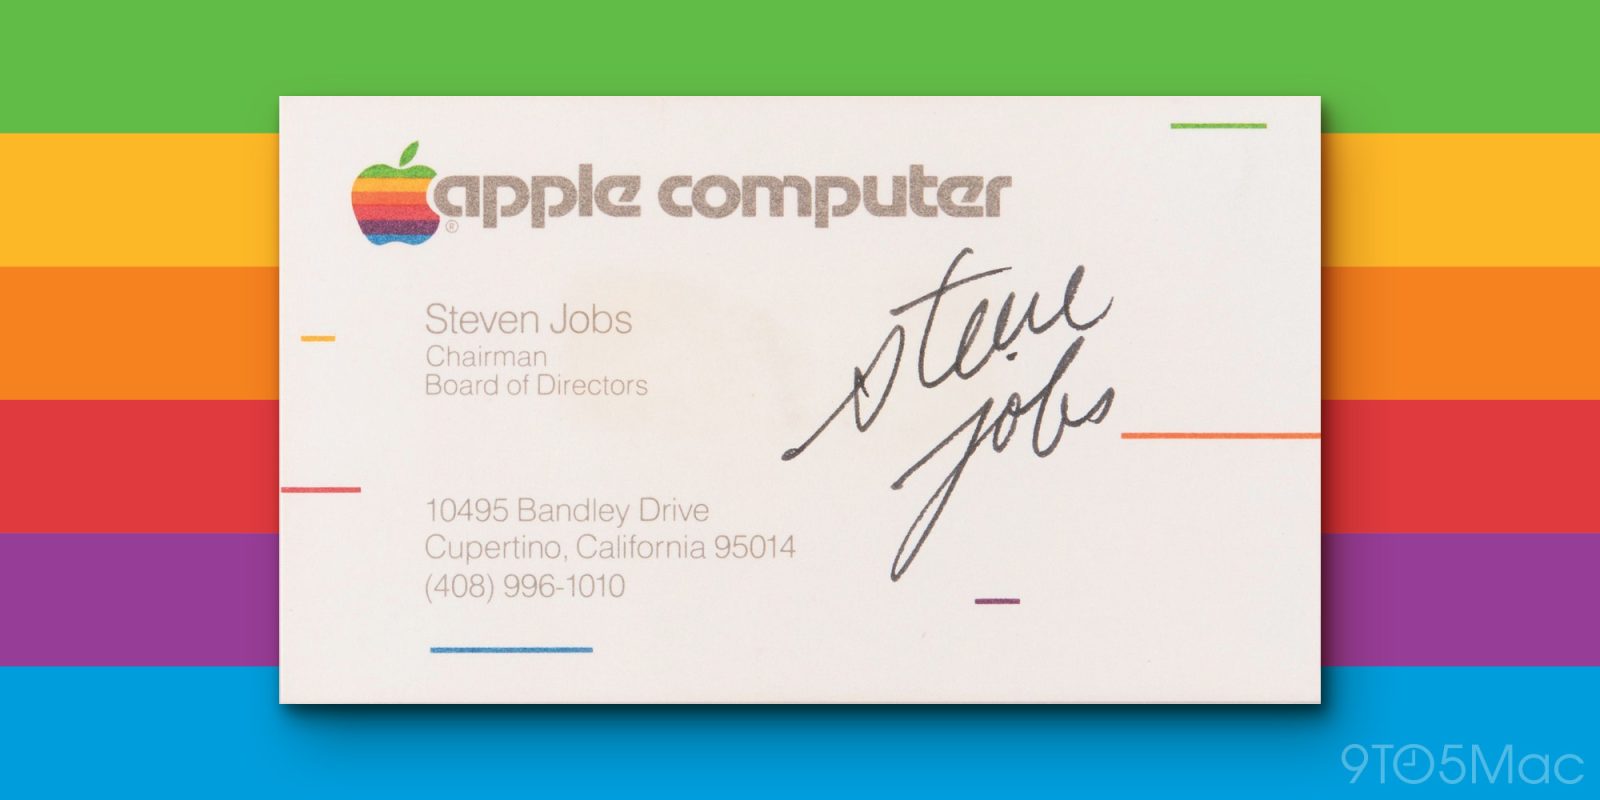 What’s a Steve Jobs signed business card worth? How about 1,183